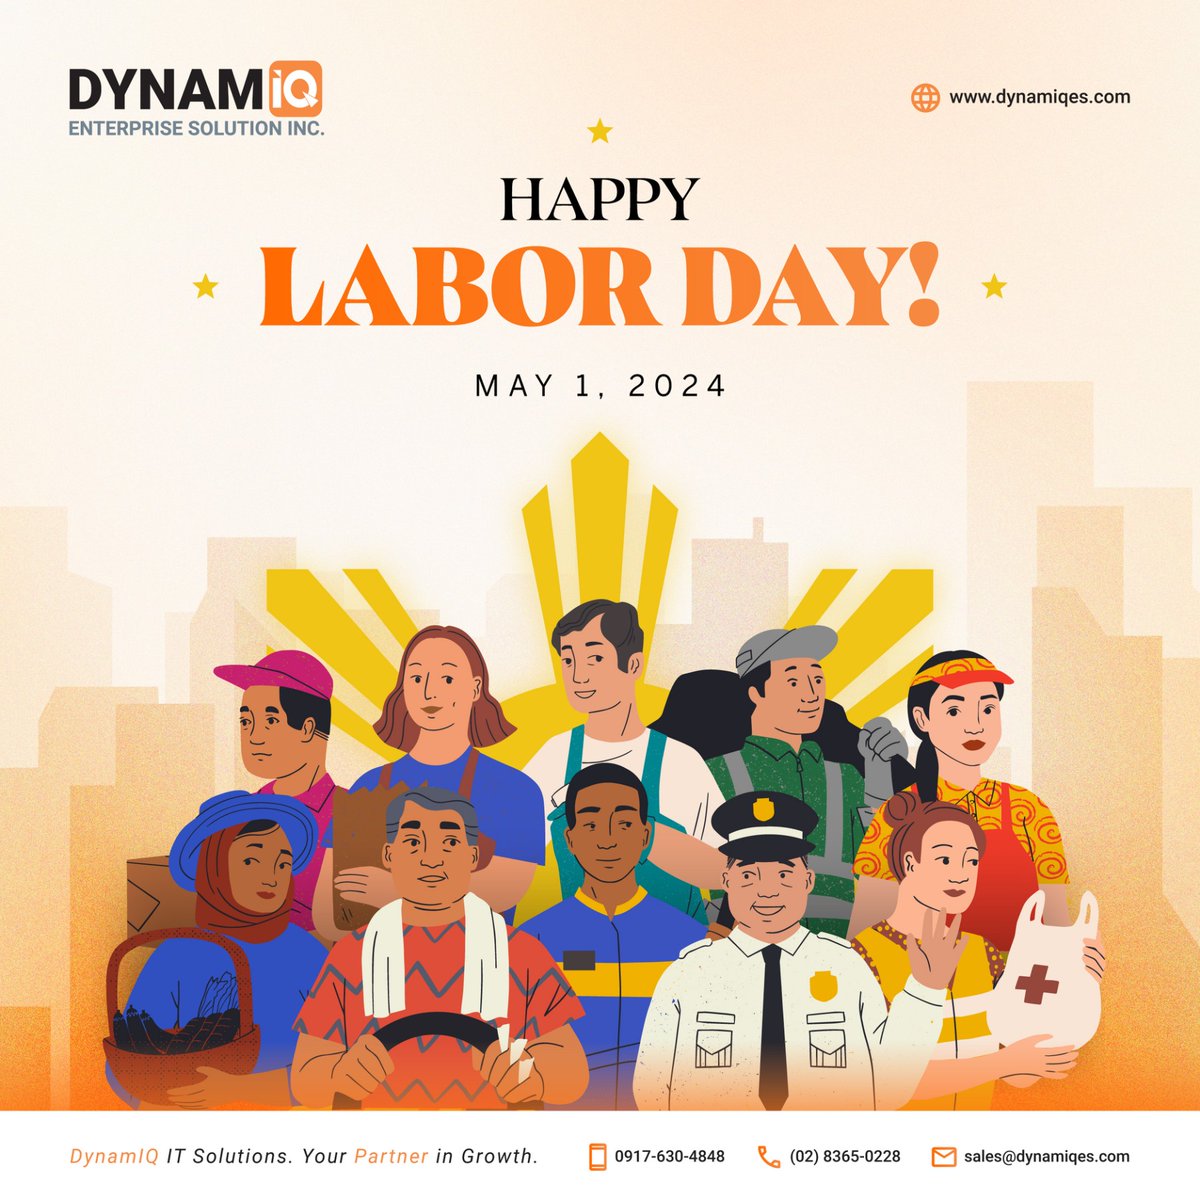 Honoring the hands that build, the minds that innovate, and the hearts that drive progress. Happy Labor Day!

#SAPBusinessOne #SAPGoldPartner #SAPPartnerPhilippines  #SAPPhilippines #erpsoftwaresolutions #erpsolutions #erpsoftware #accountingsoftware #accountingsolutions #DynamIQ